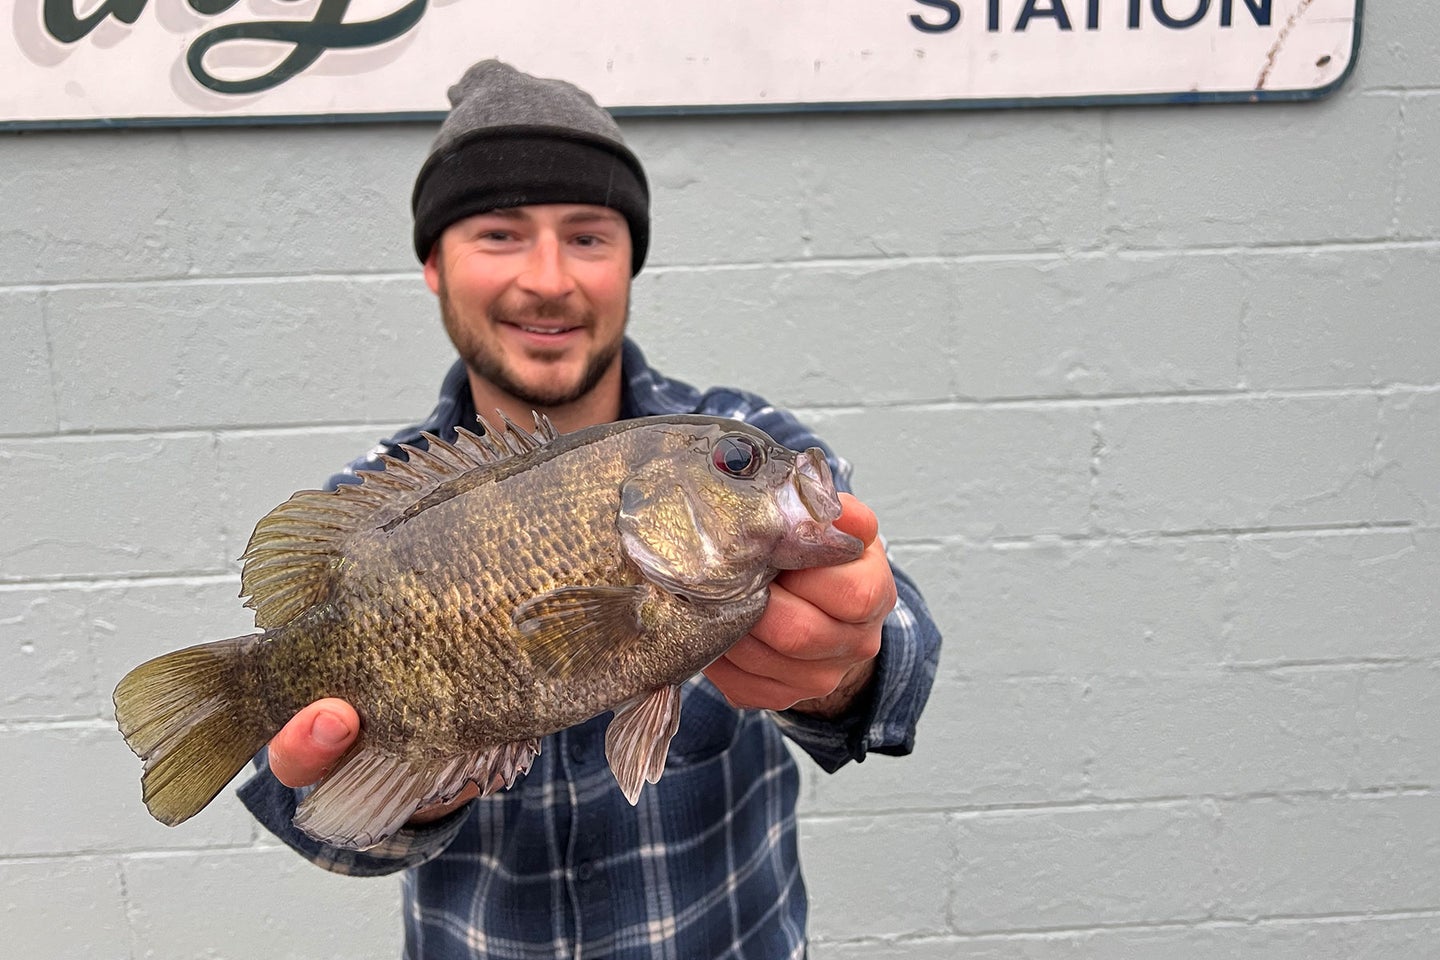 An angler poses with a state-record rock bass.